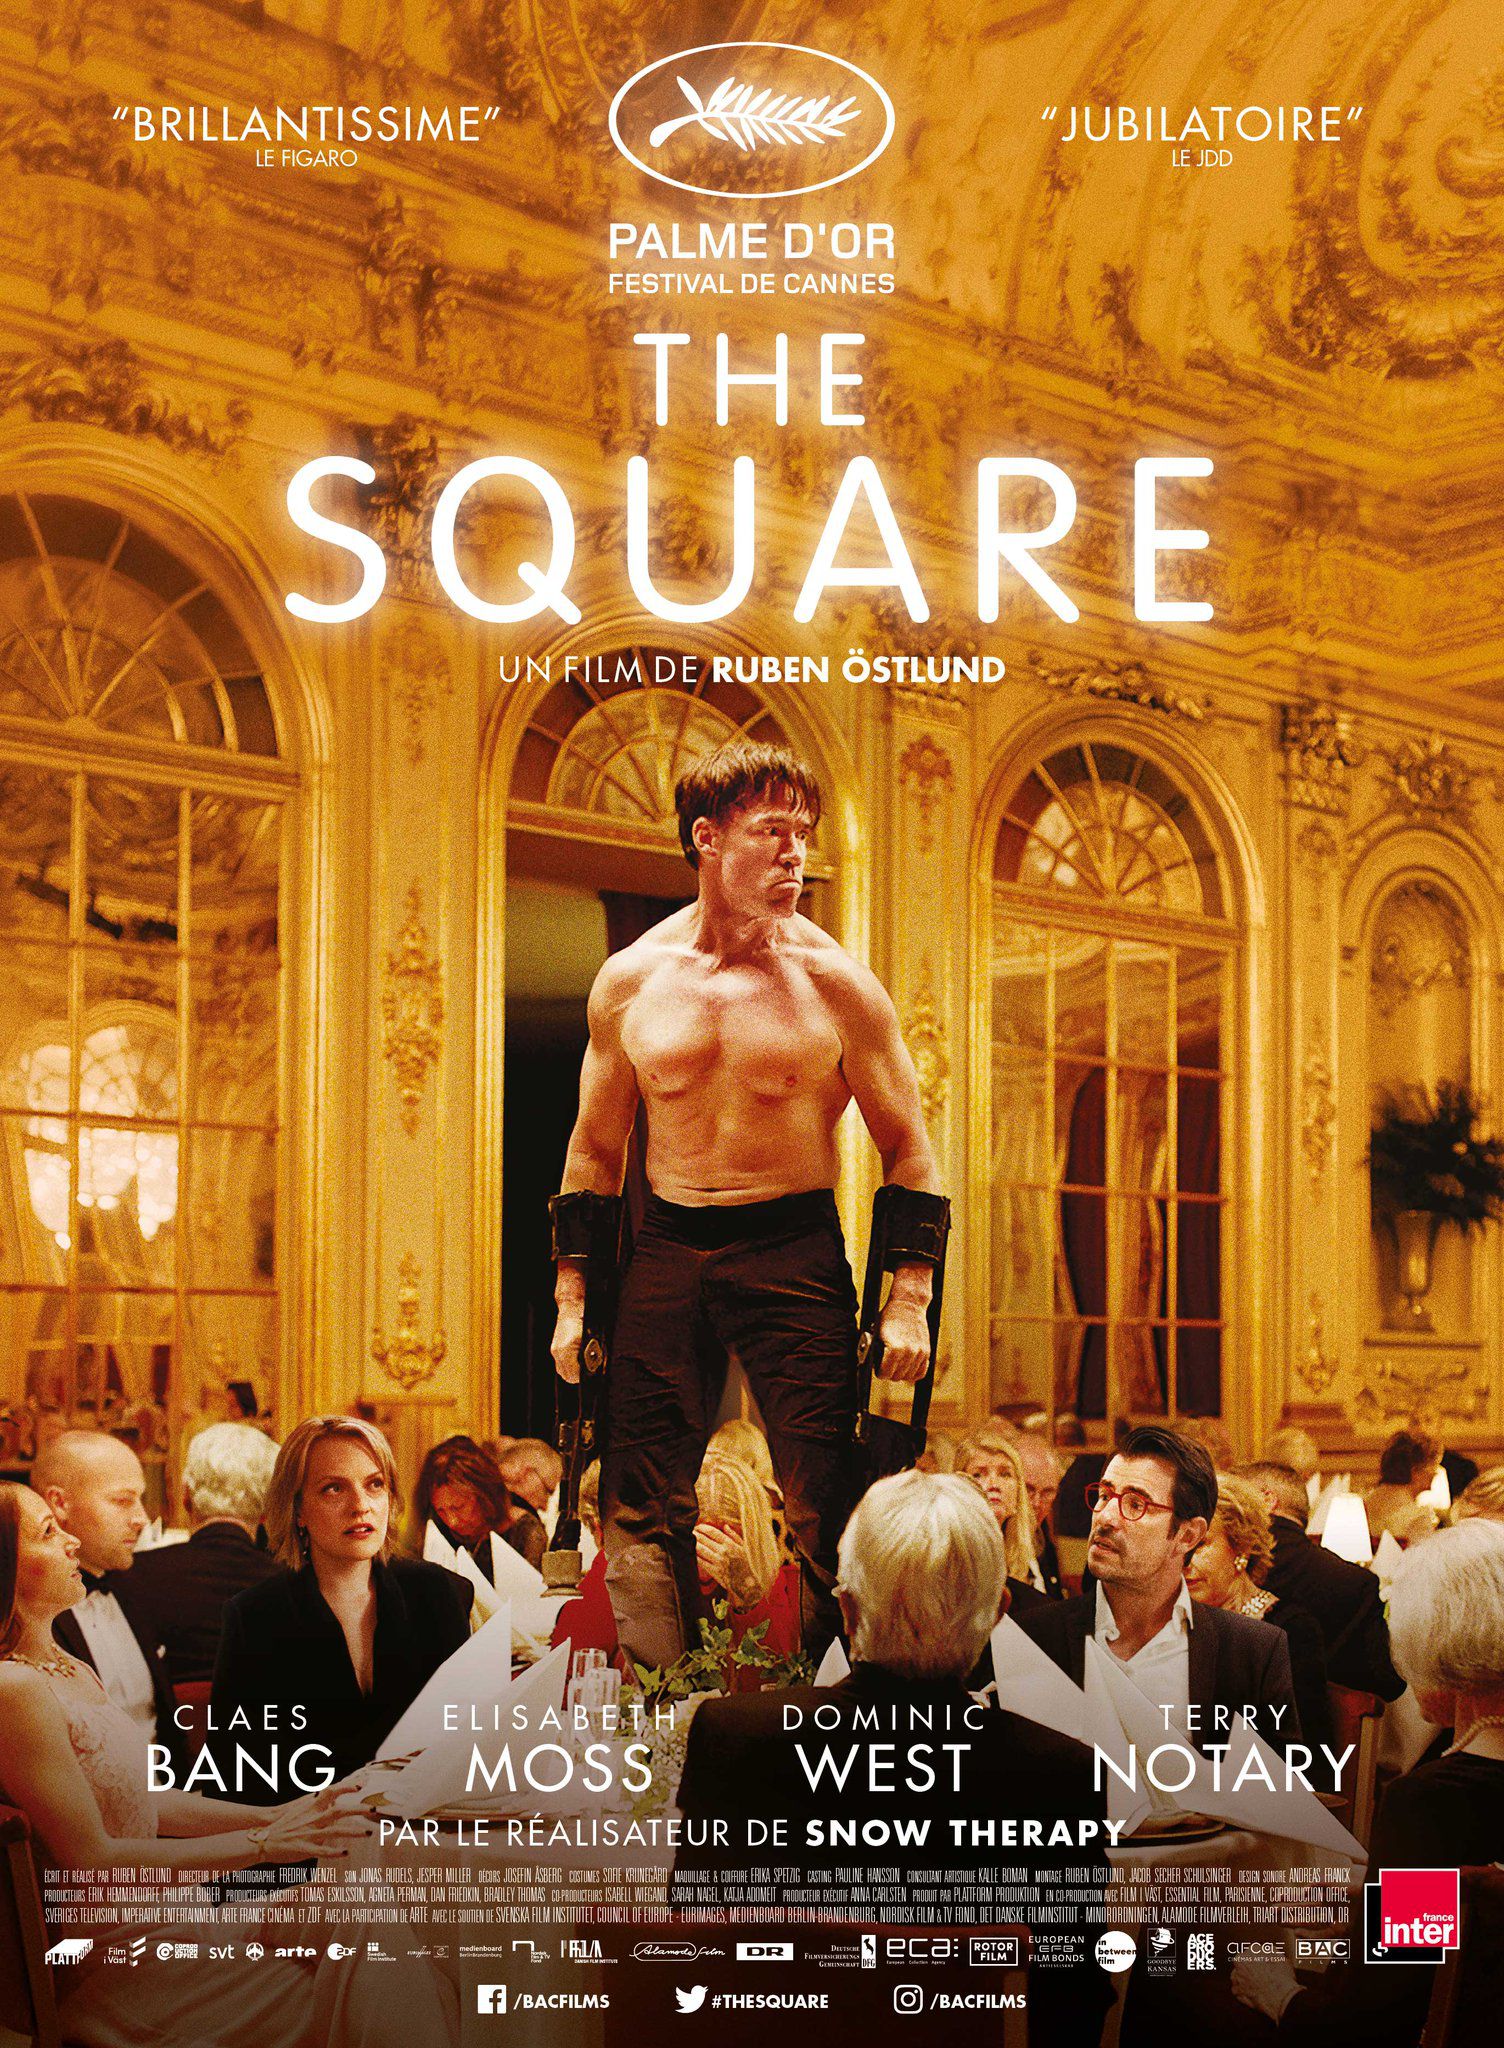 The Square - Film (2017) streaming VF gratuit complet